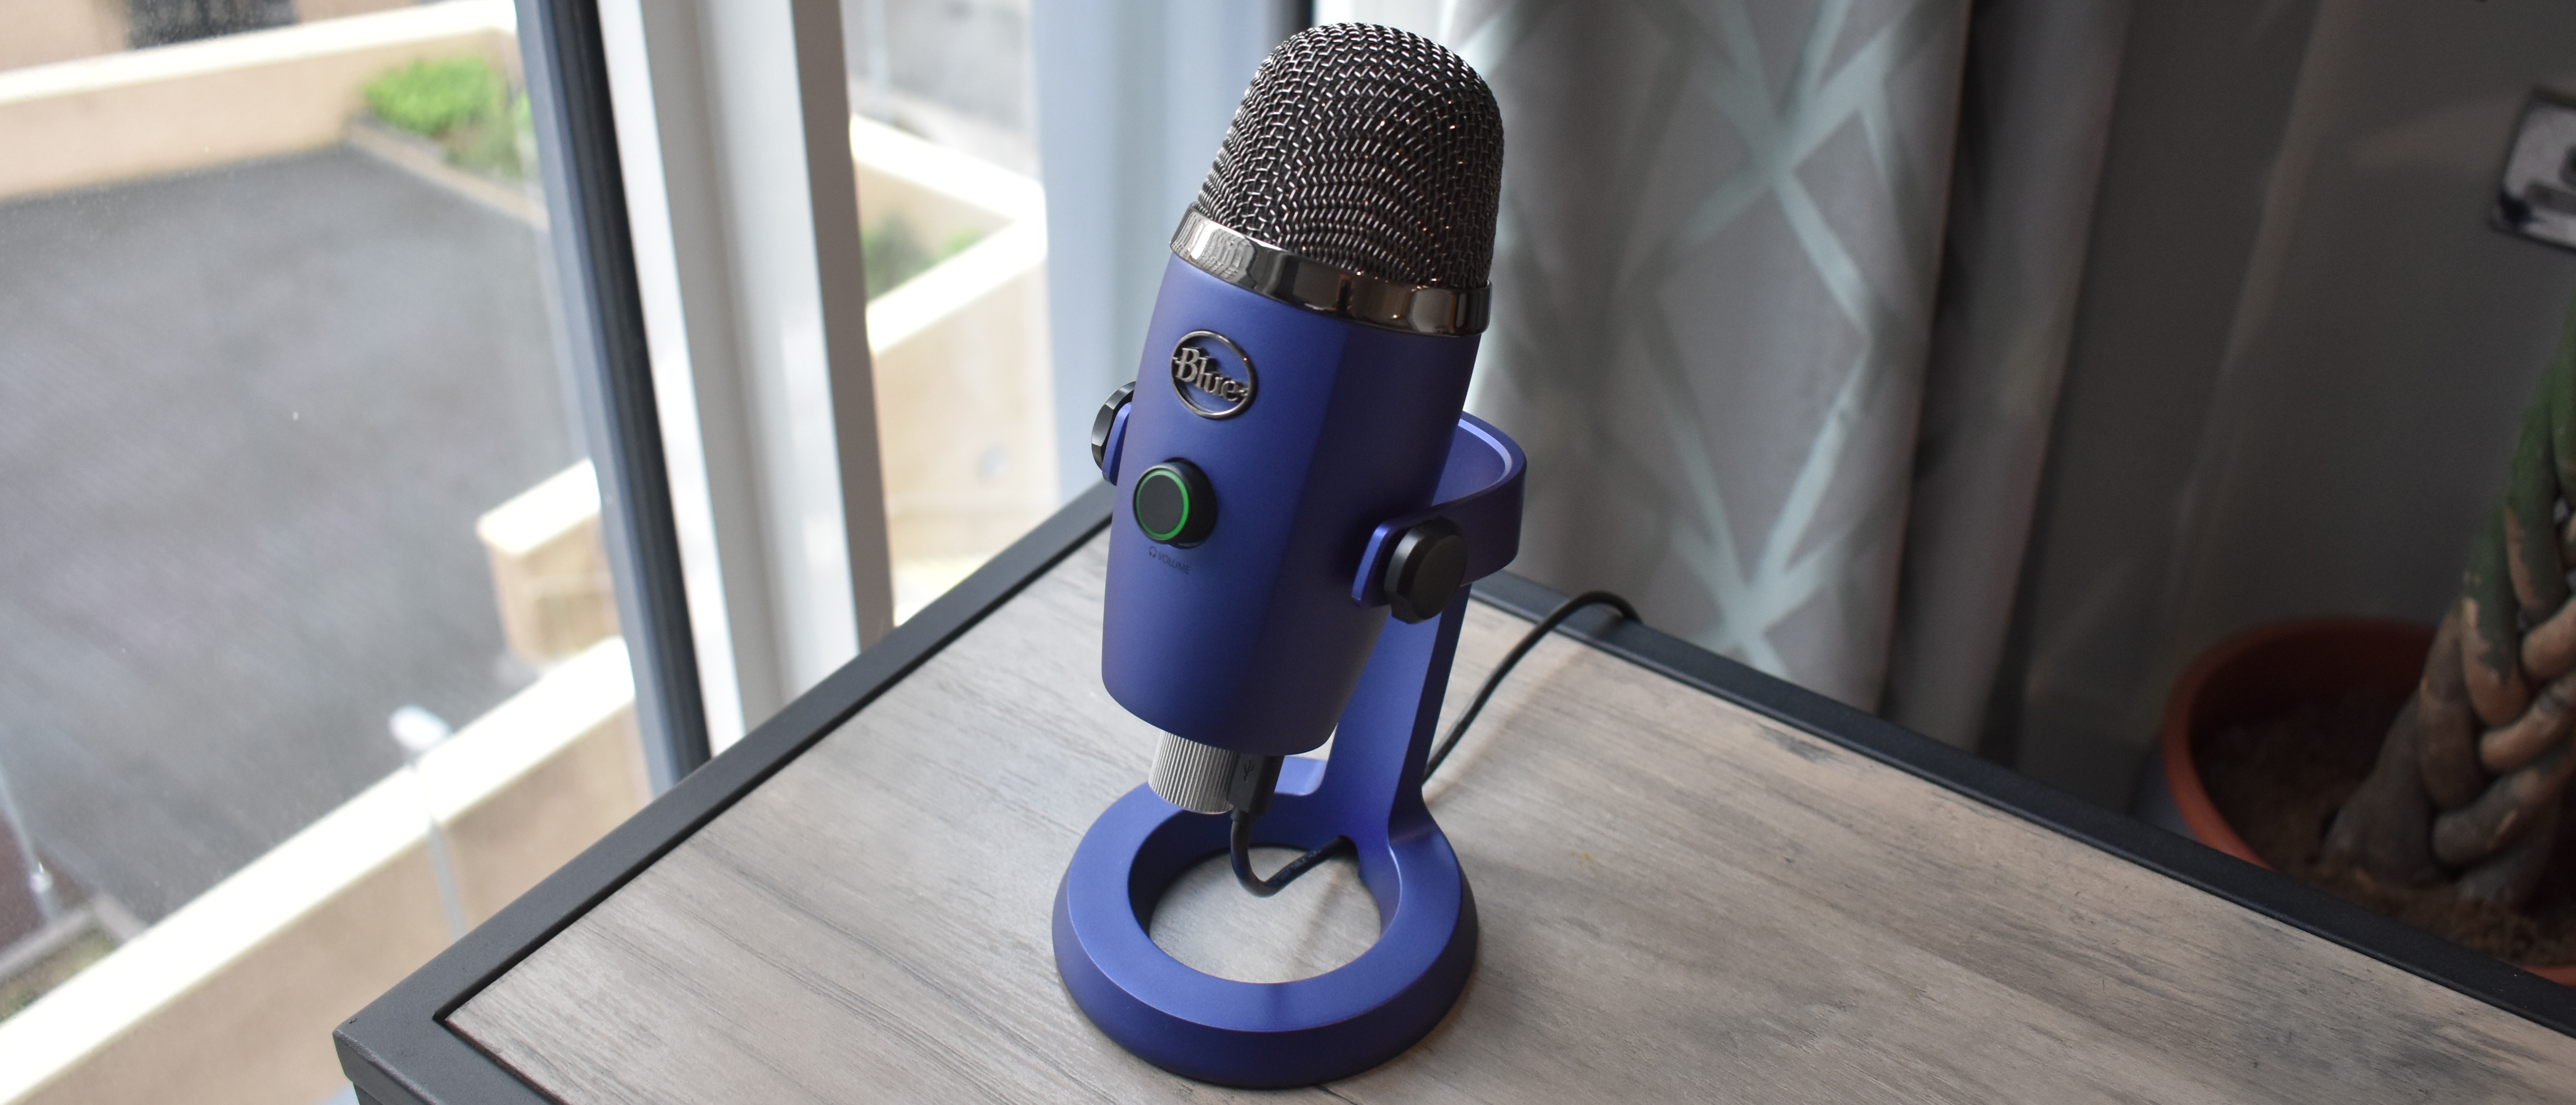 Blue's Yeti Nano is built for simple, high-quality desktop recording